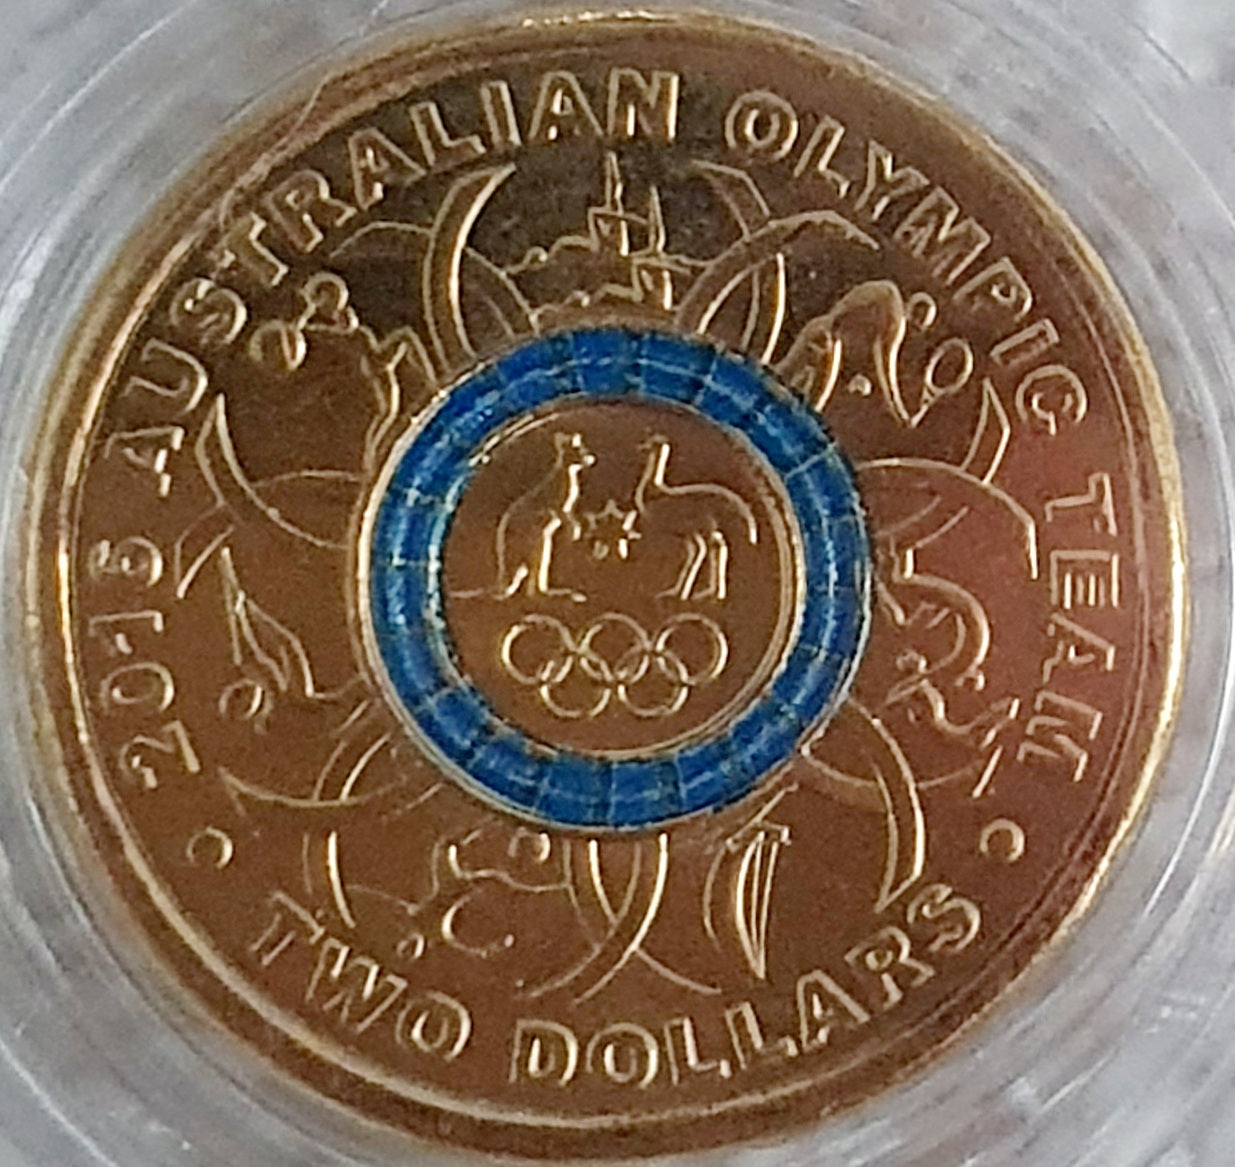 Collectible Australian Olympic Team Blue Ring $2 Coin | Mysite